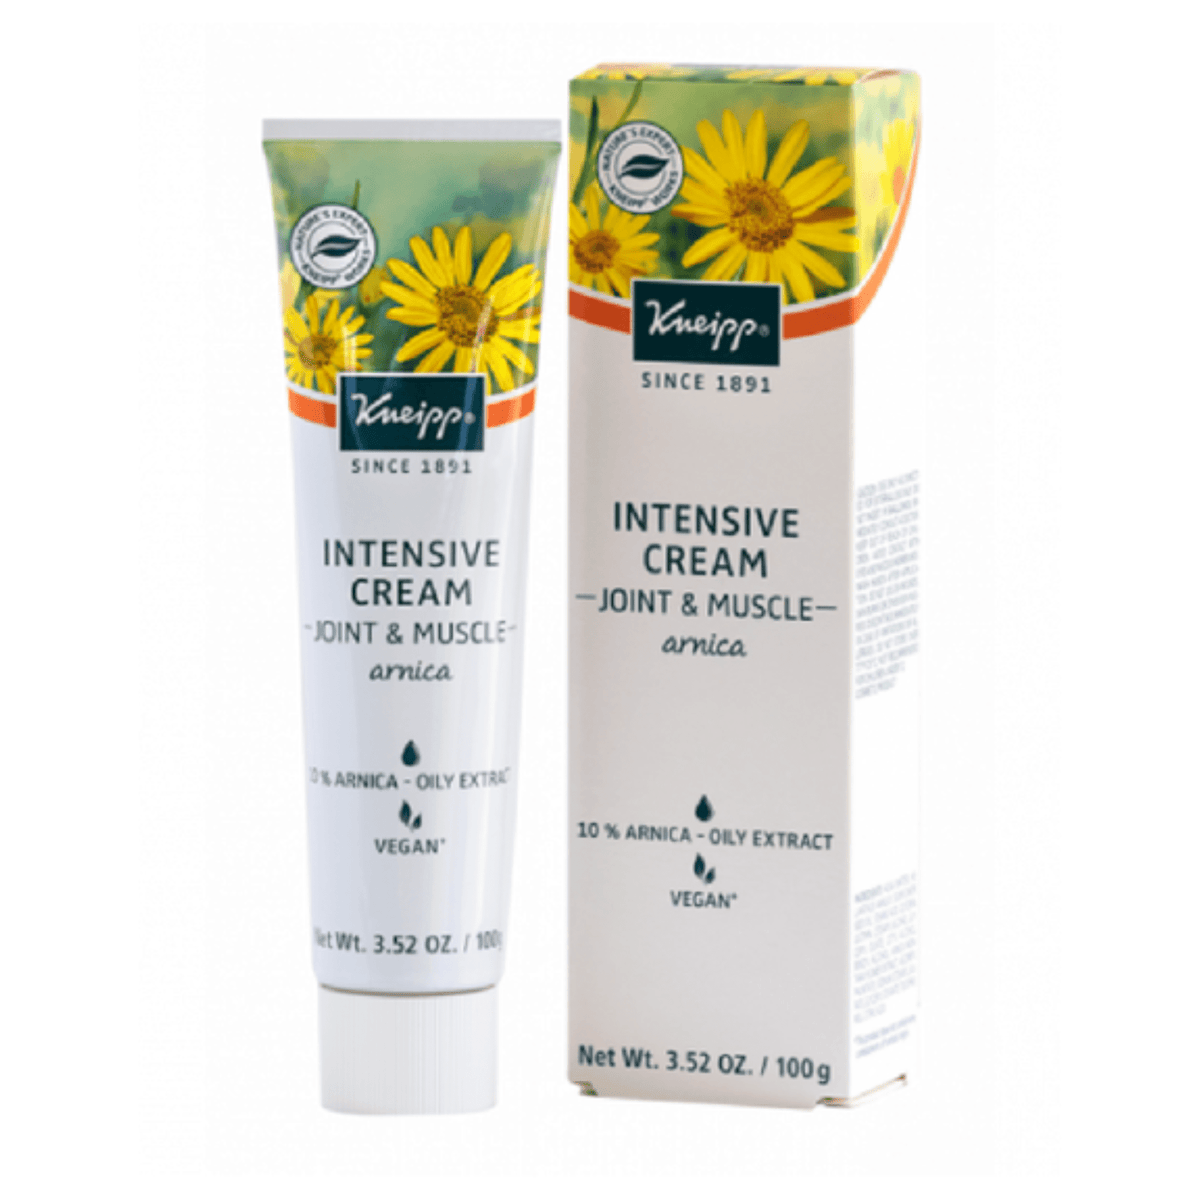 Primary Image of Arnica Joint & Muscle Intensive Cream